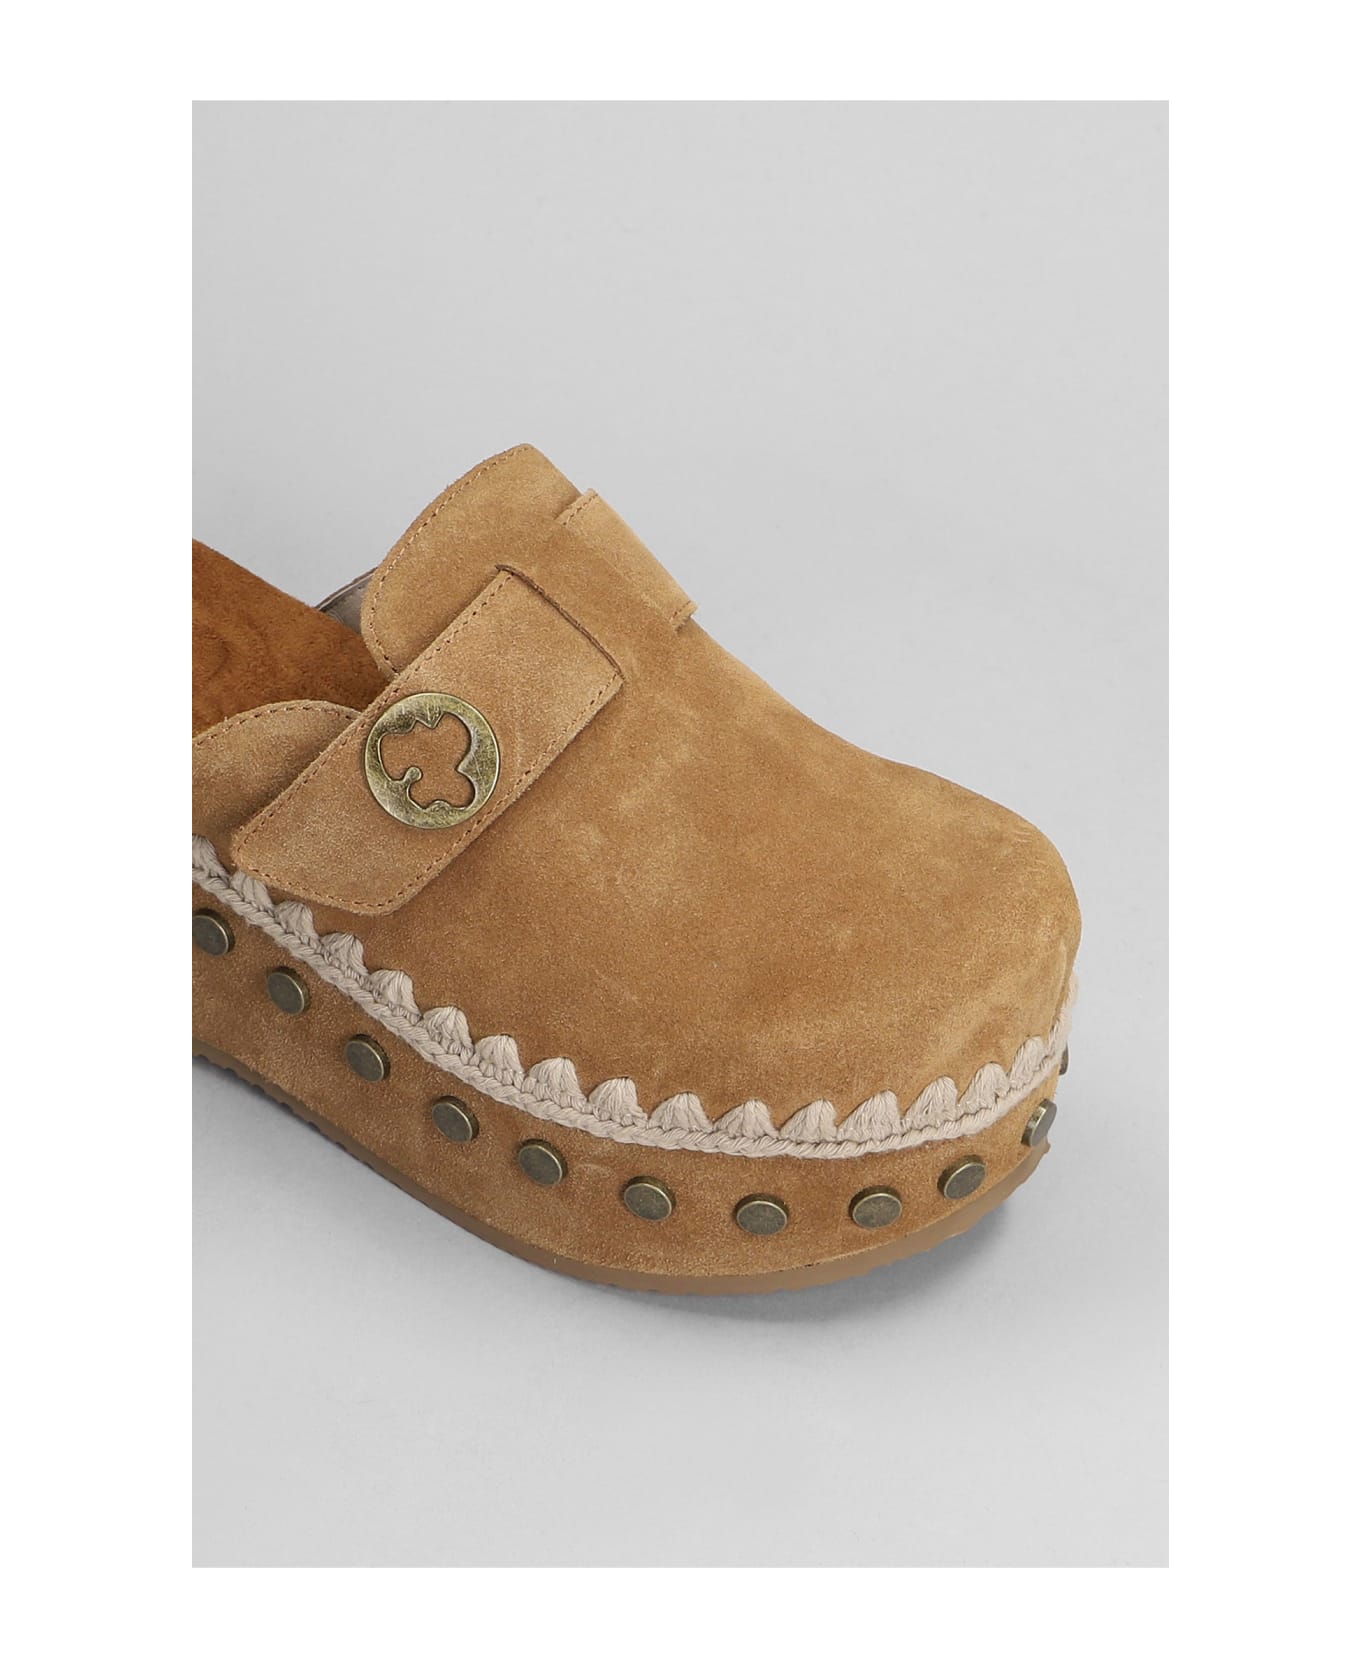 Mou Clog Slipper-mule In Leather Color Suede - leather color